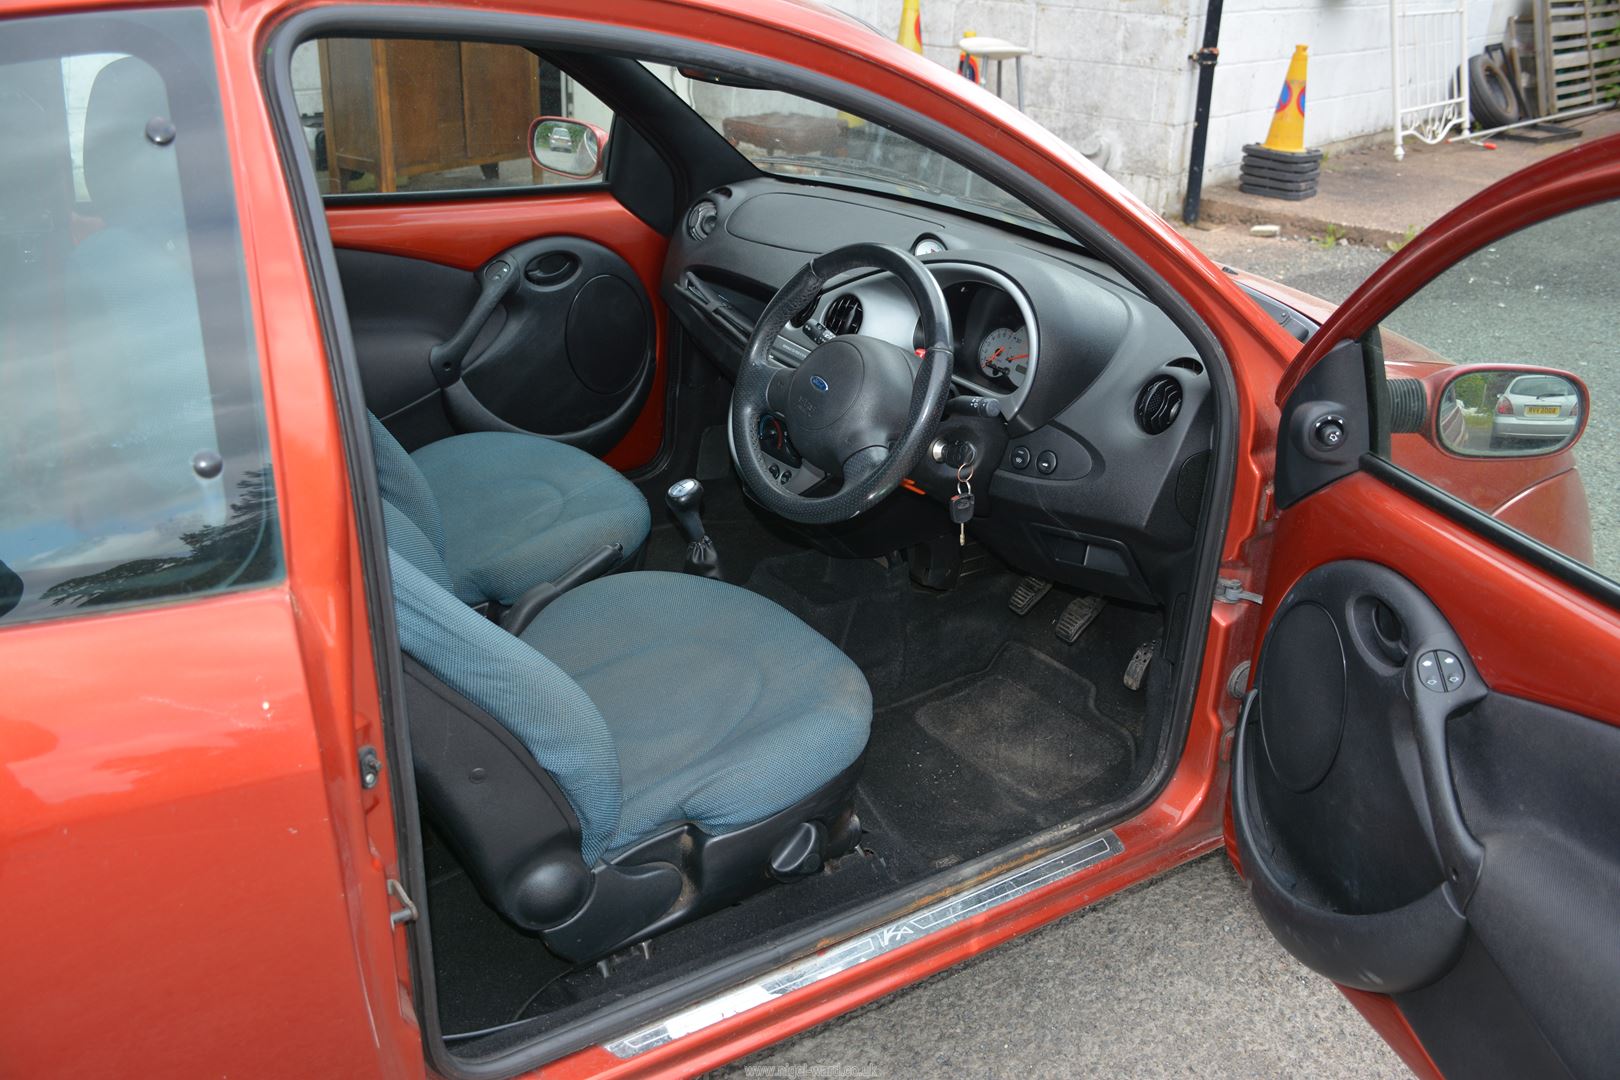 A Ford KA Zetec Climate 1299cc petrol-engined three door hatchback motor Car finished in red, - Image 9 of 14